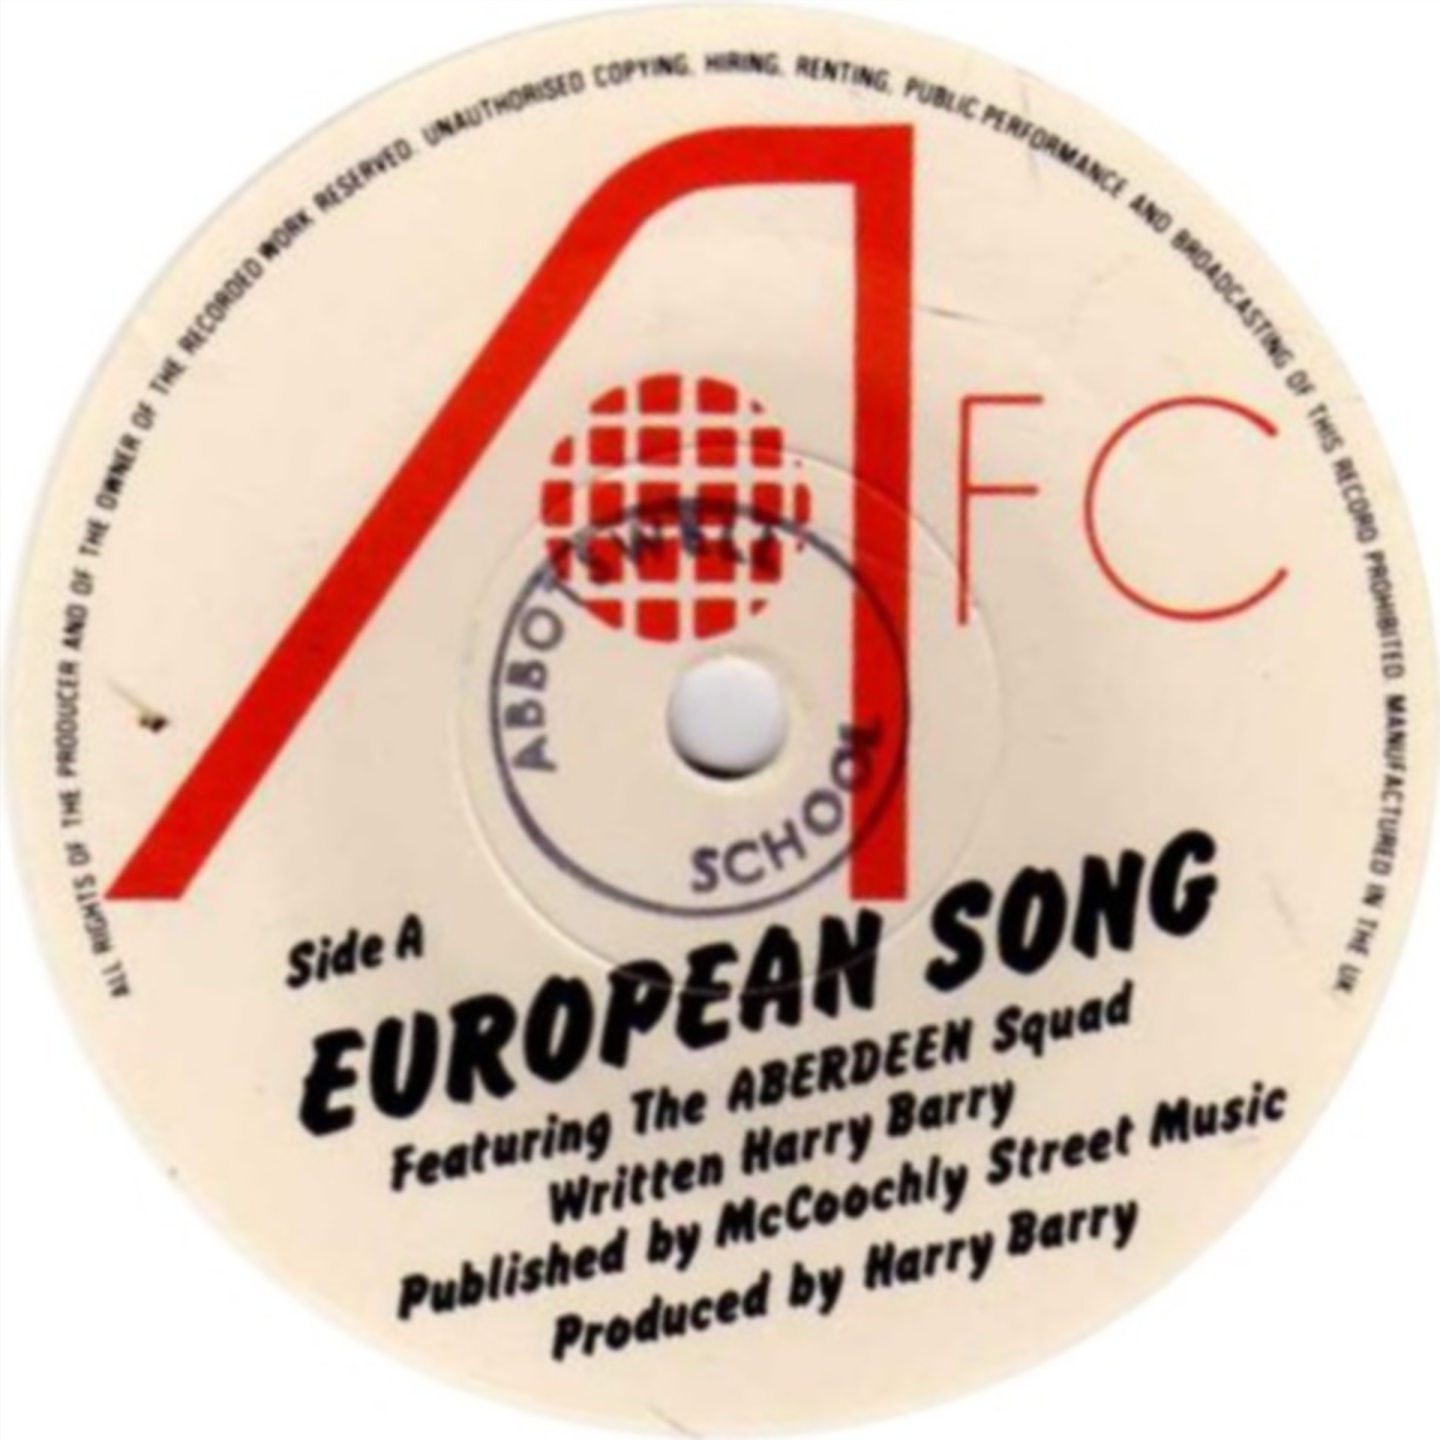 100,000 copies of European Song were printed - and all sold out quickly.